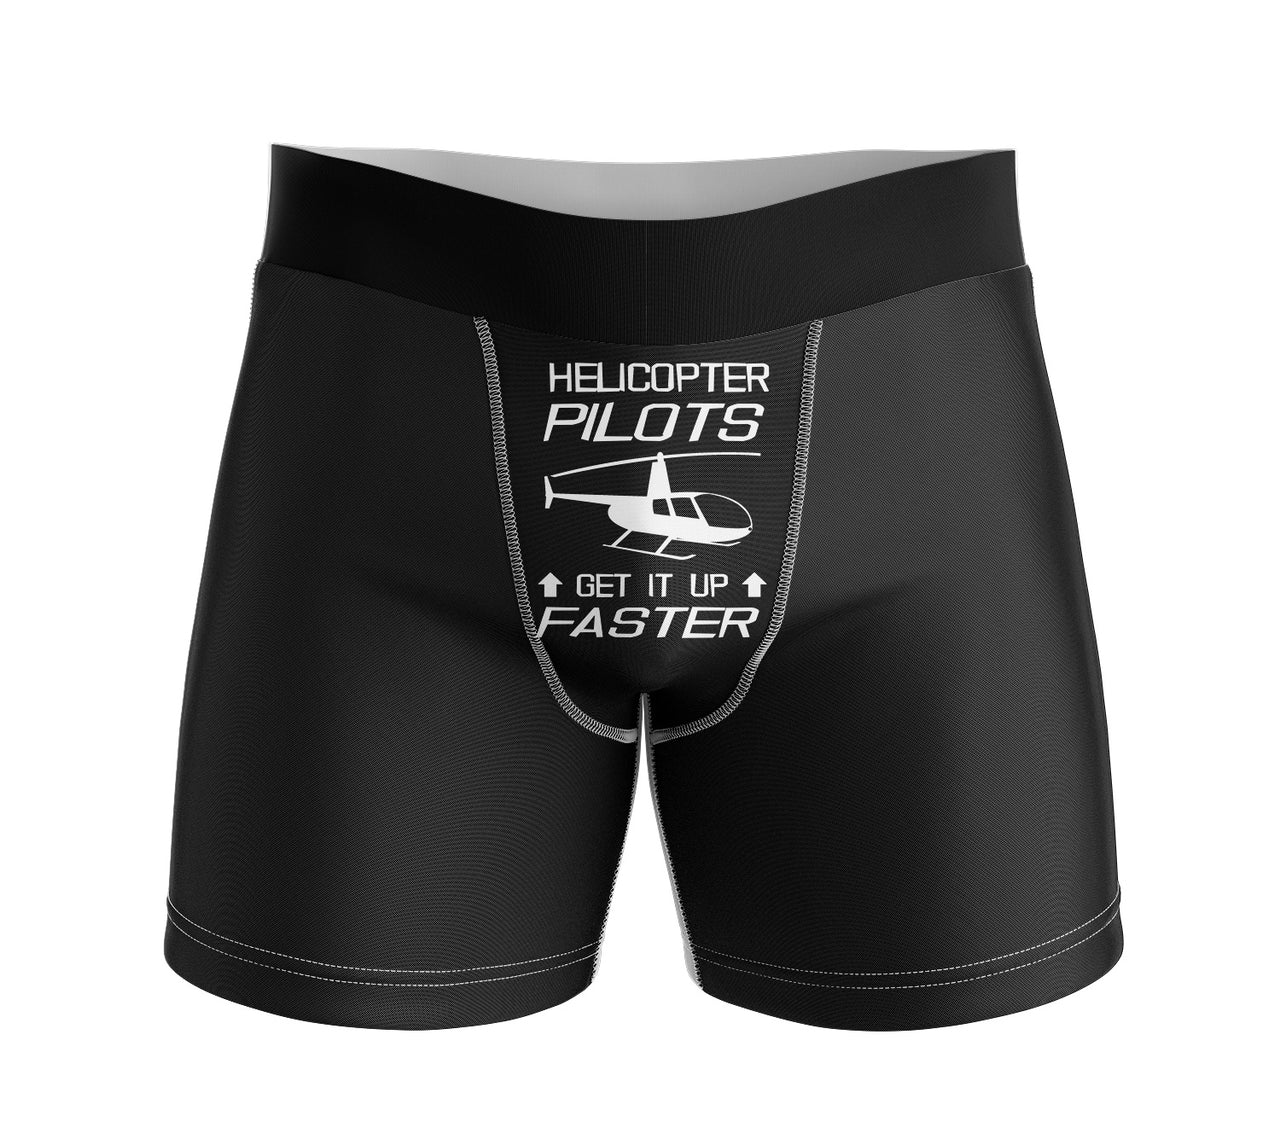 Helicopter Pilots Get It Up Faster Designed Men Boxers